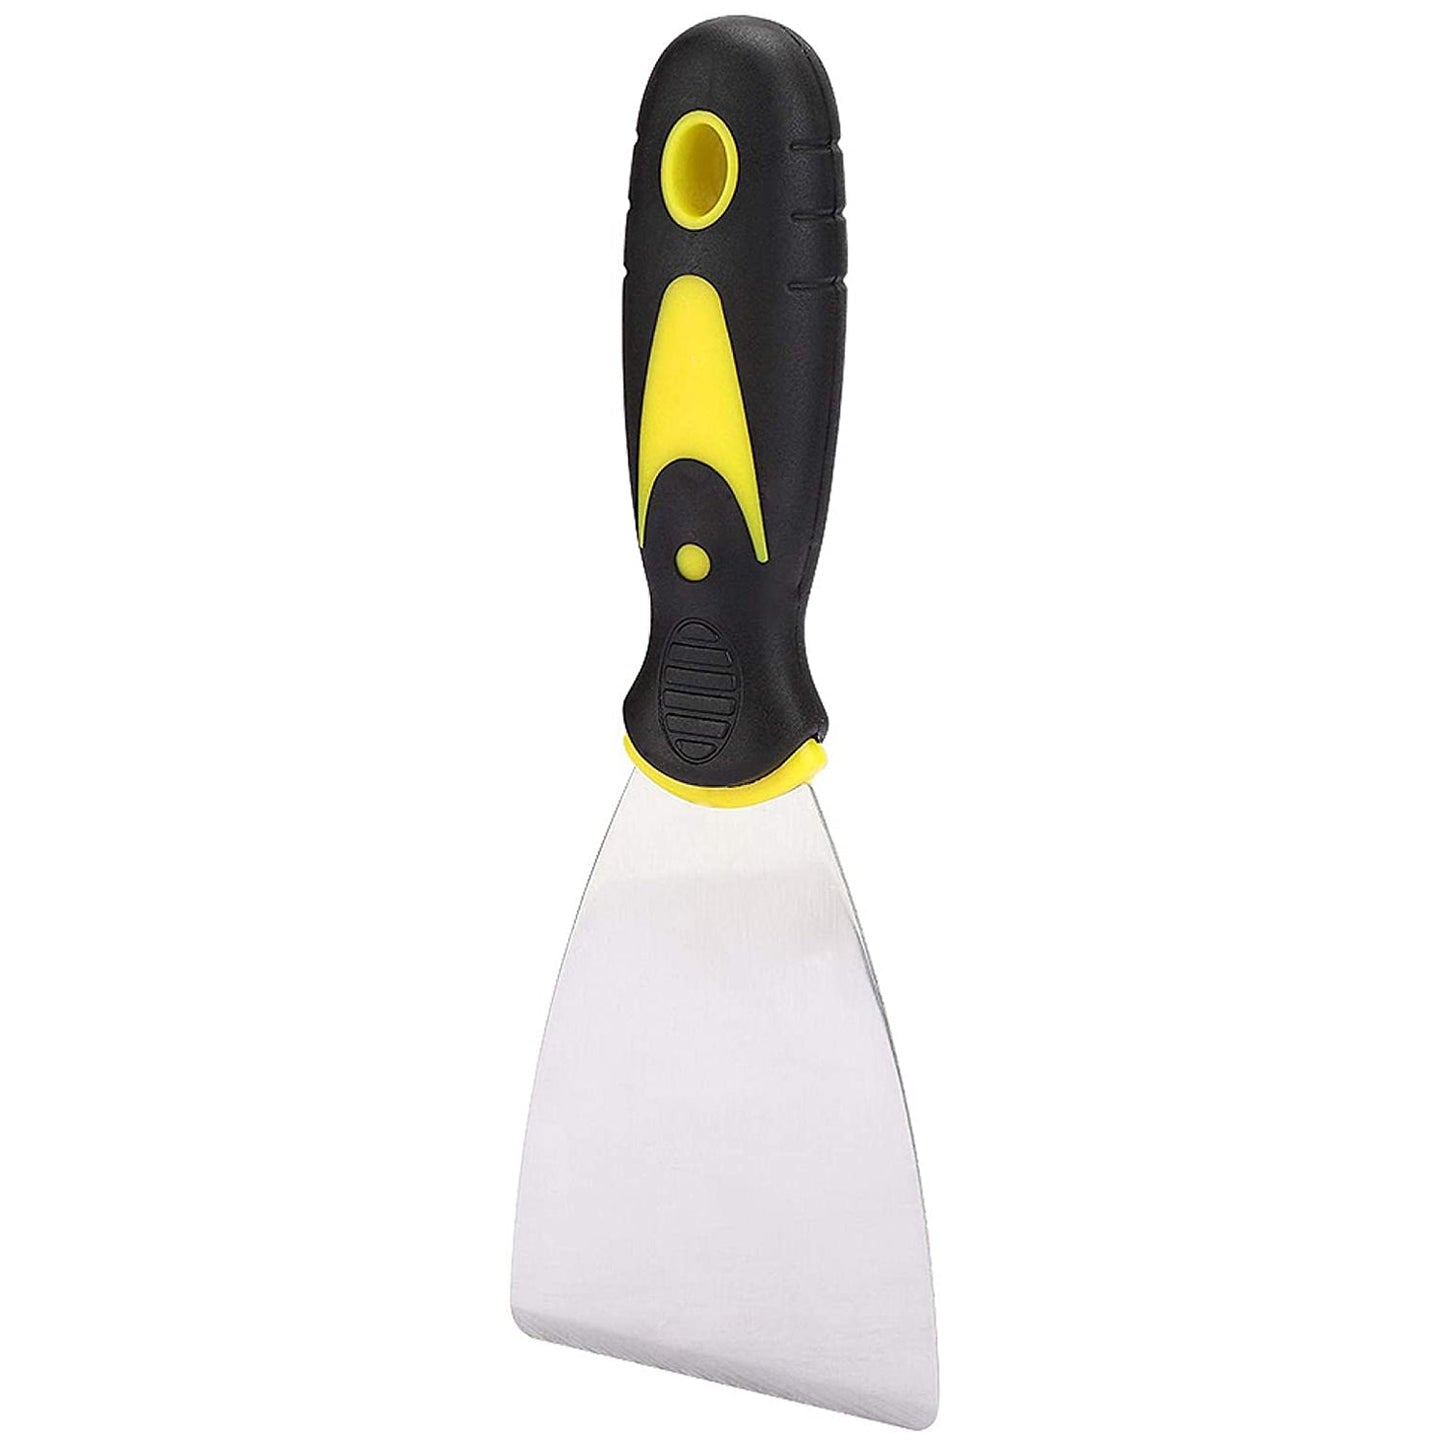 7479 Putty Knife Set with Soft Rubber Handle for Drywall, Putty, Decals, Wallpaper, Baking, Patching and Painting 